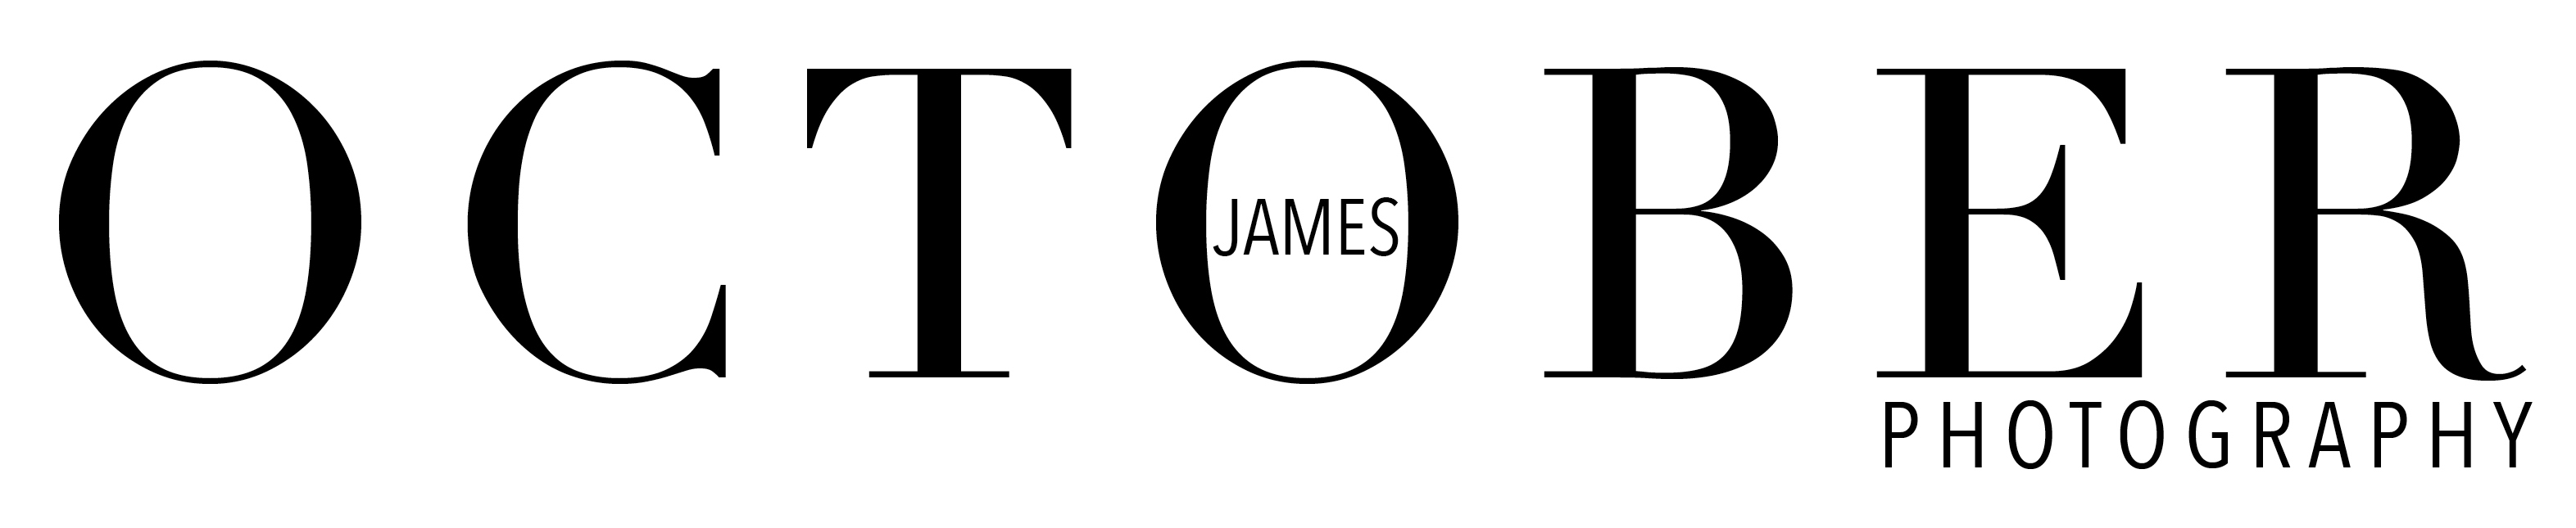 Logo of October James Photography